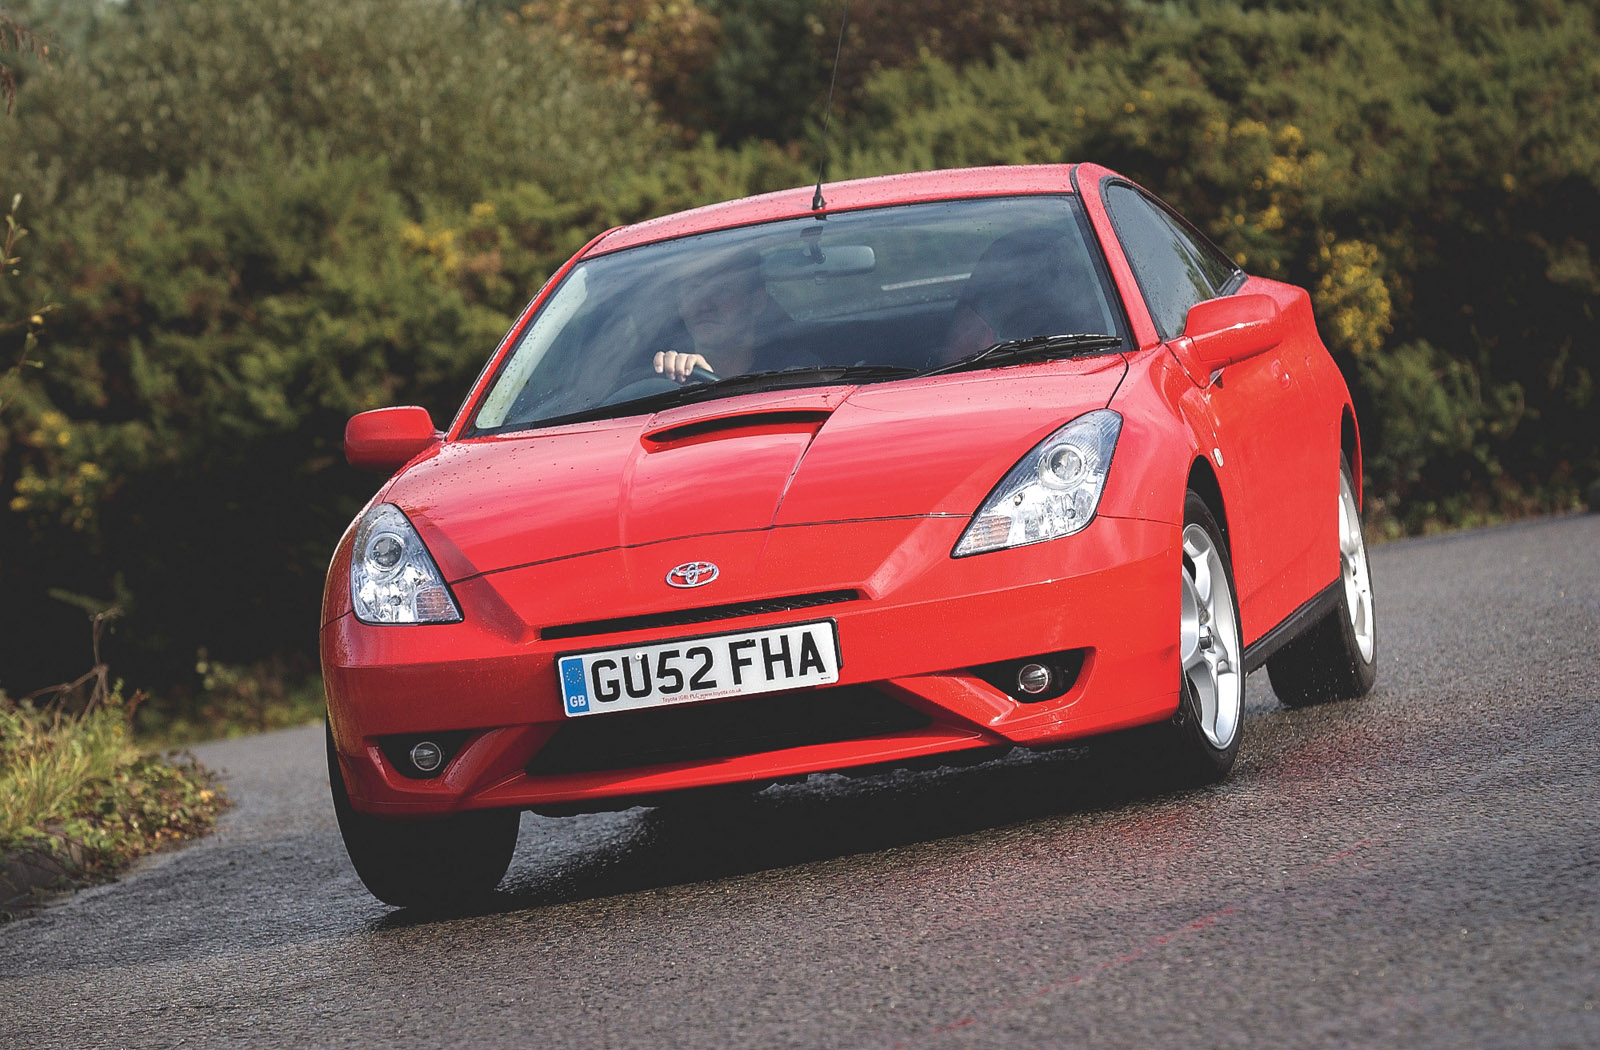 Used car buying guide: Toyota Celica | Autocar